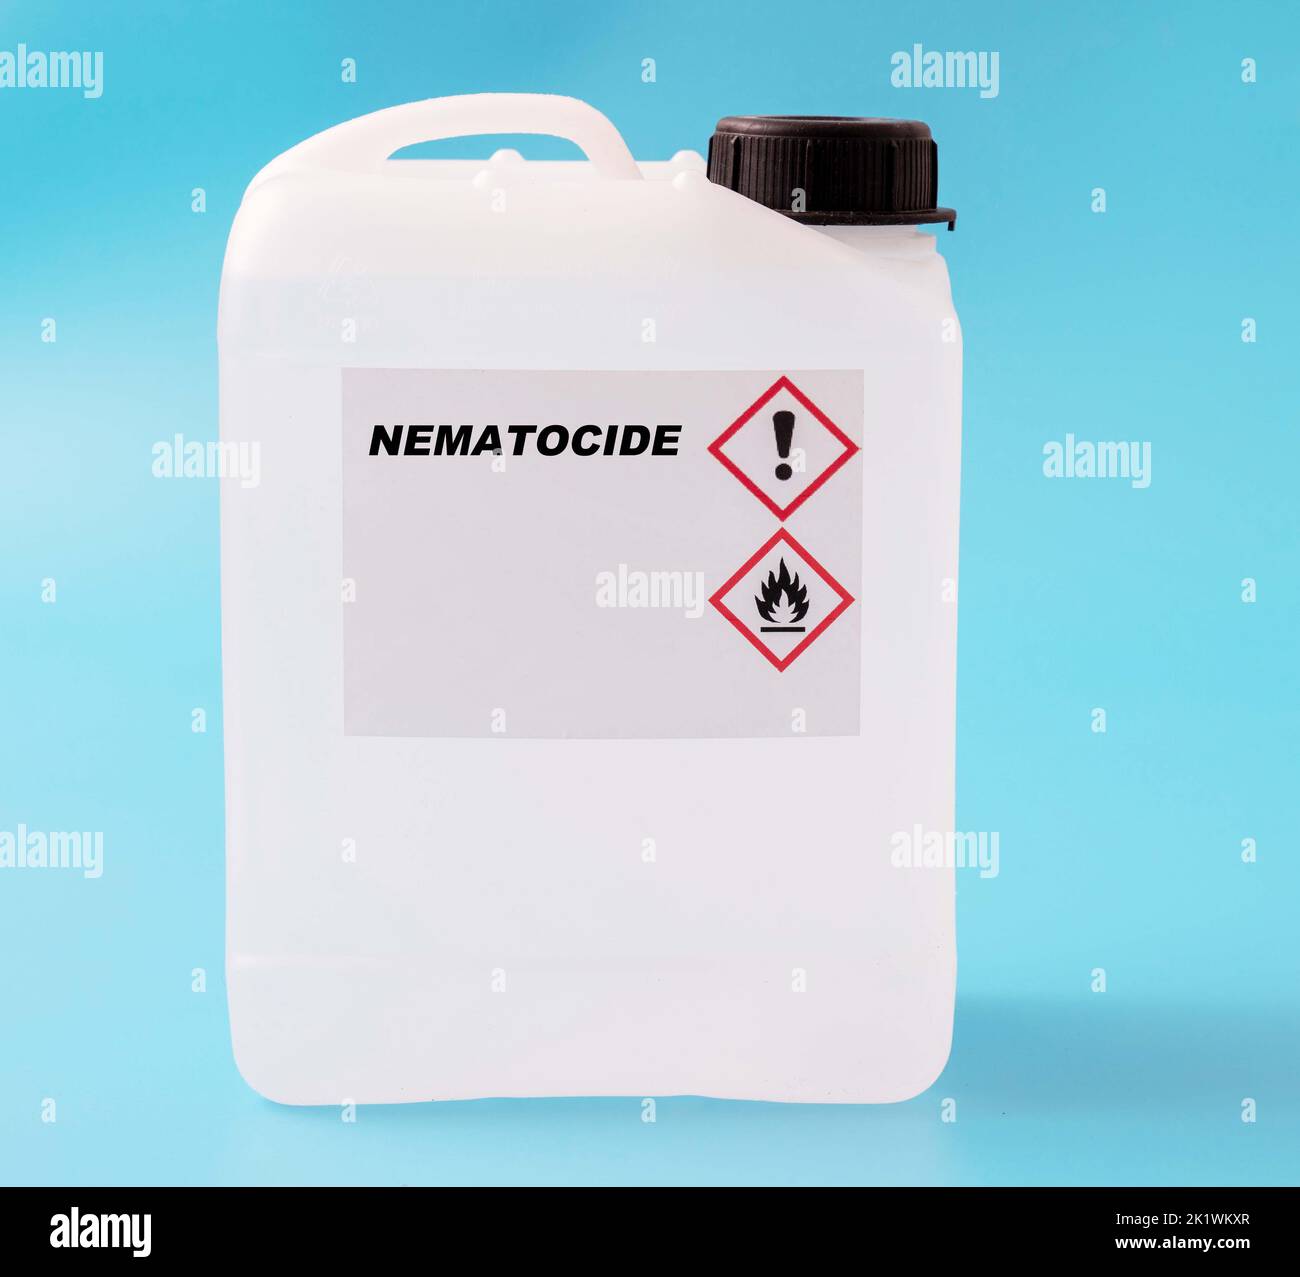 Nematocide in a plastic canister, conceptual image Stock Photo